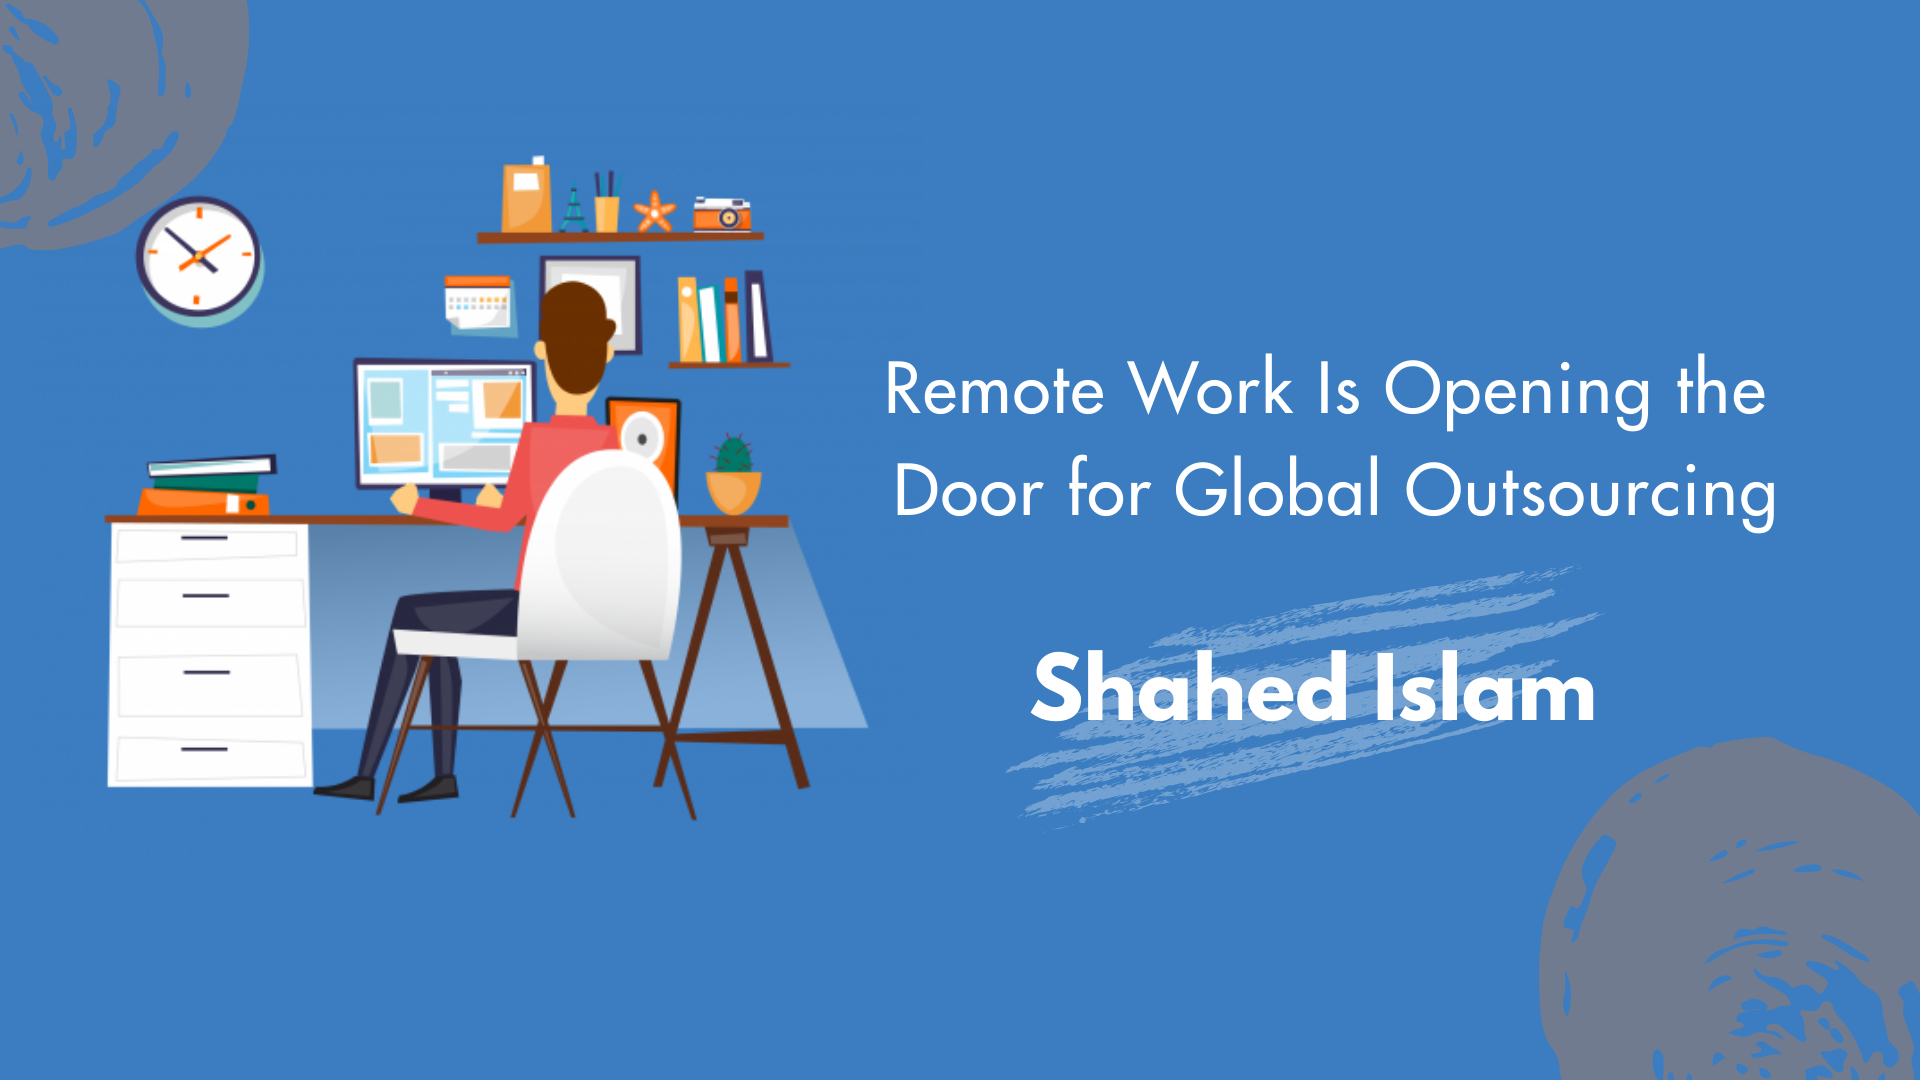 Global Outsourcing with Remote Work